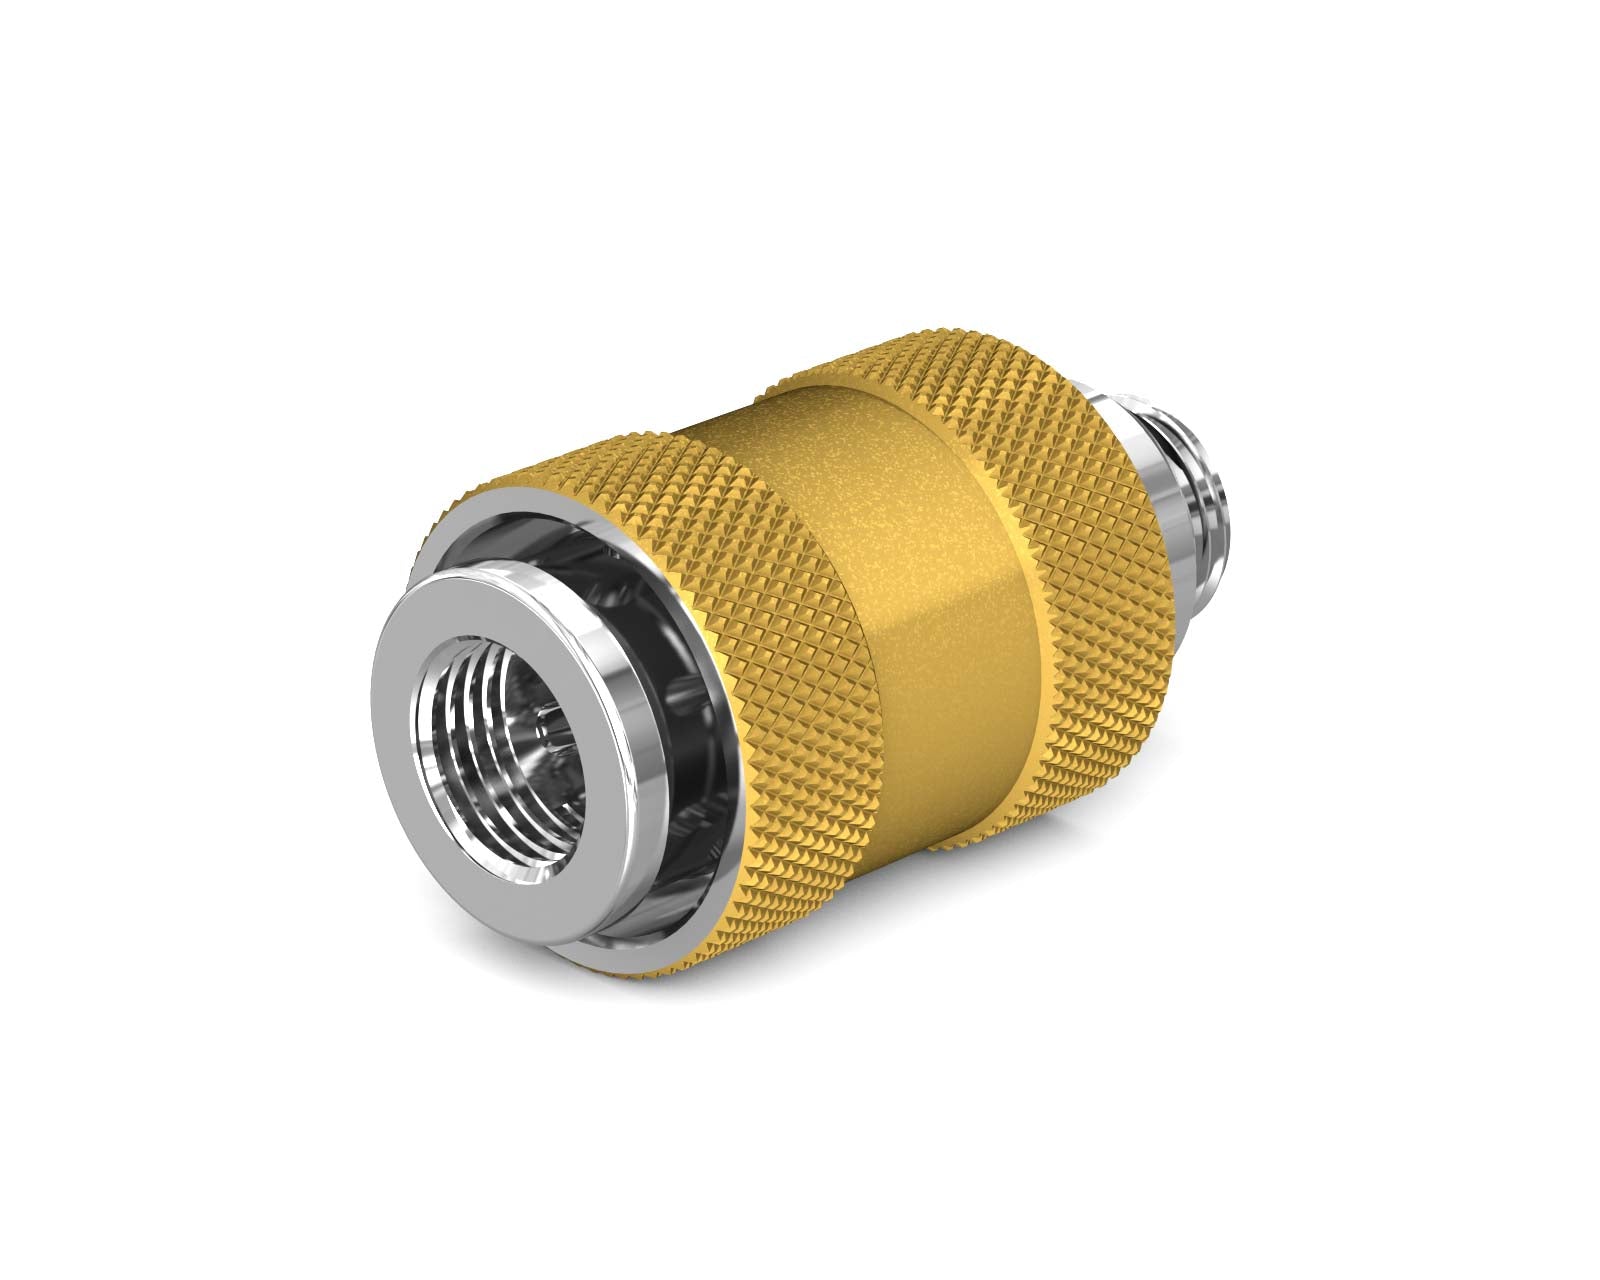 PrimoChill Male to Female G 1/4 SX Pull Drain Valve - PrimoChill - KEEPING IT COOL Gold